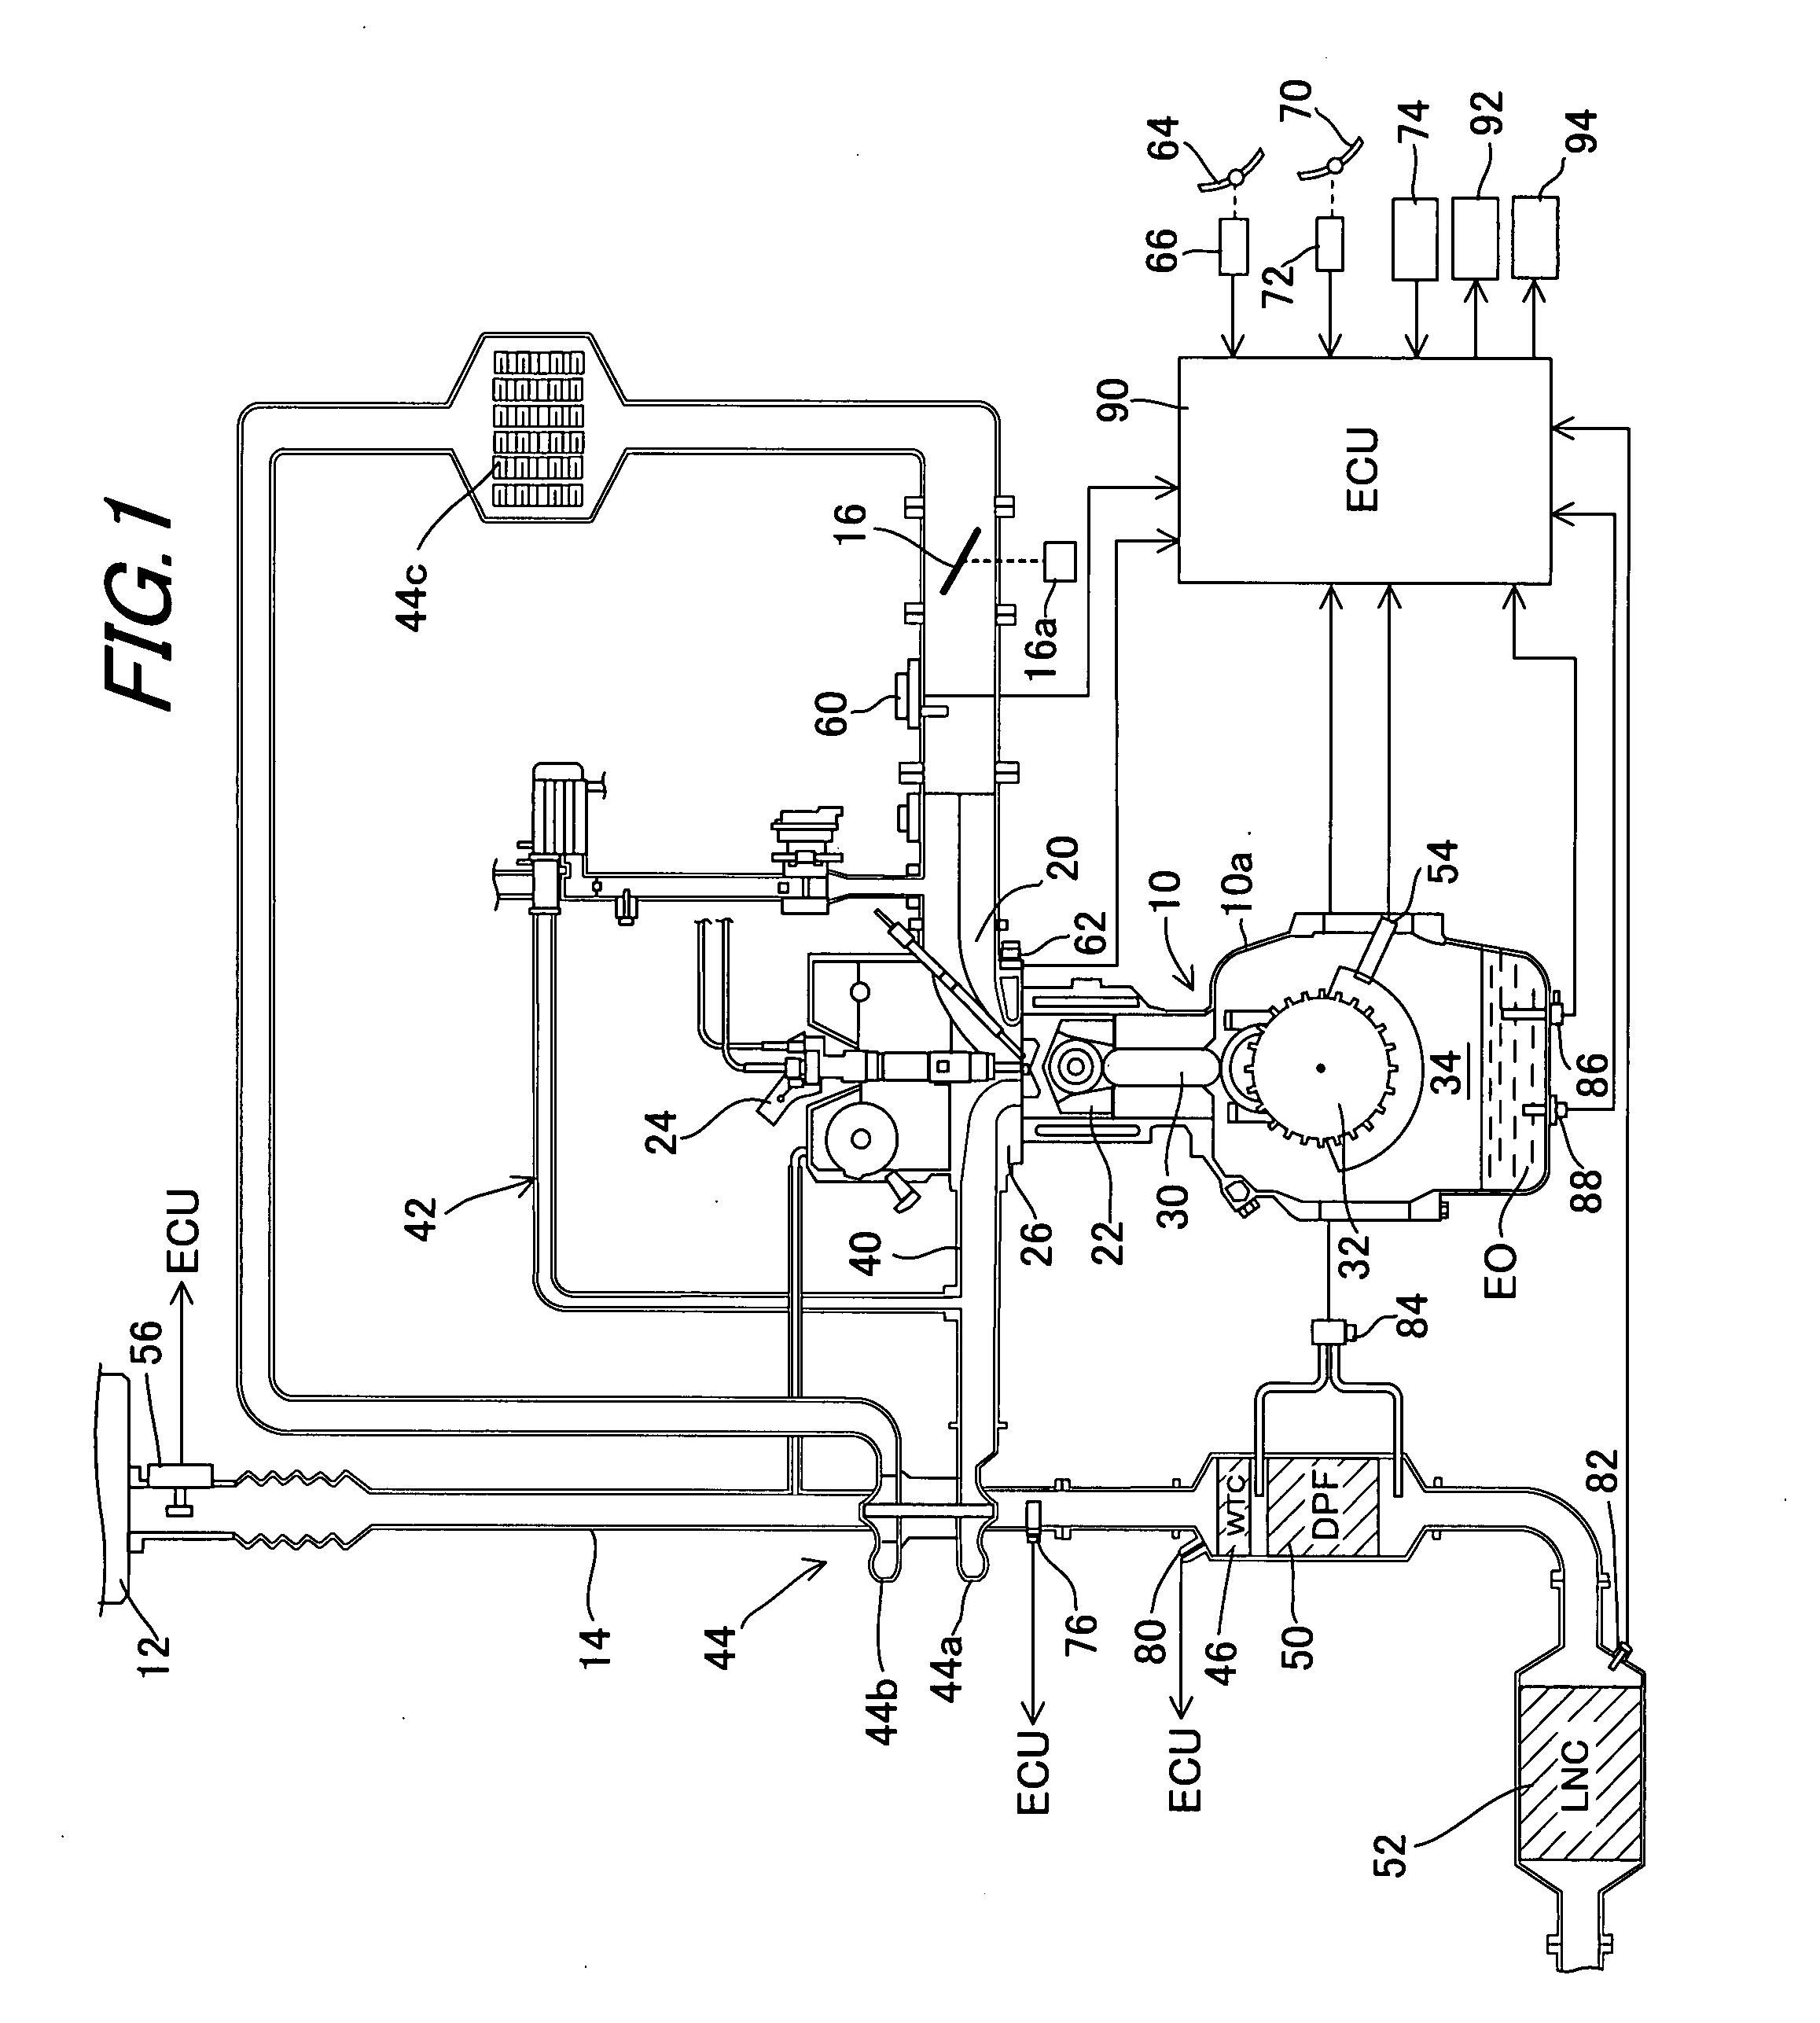 Oil level detection system of internal combustion engine